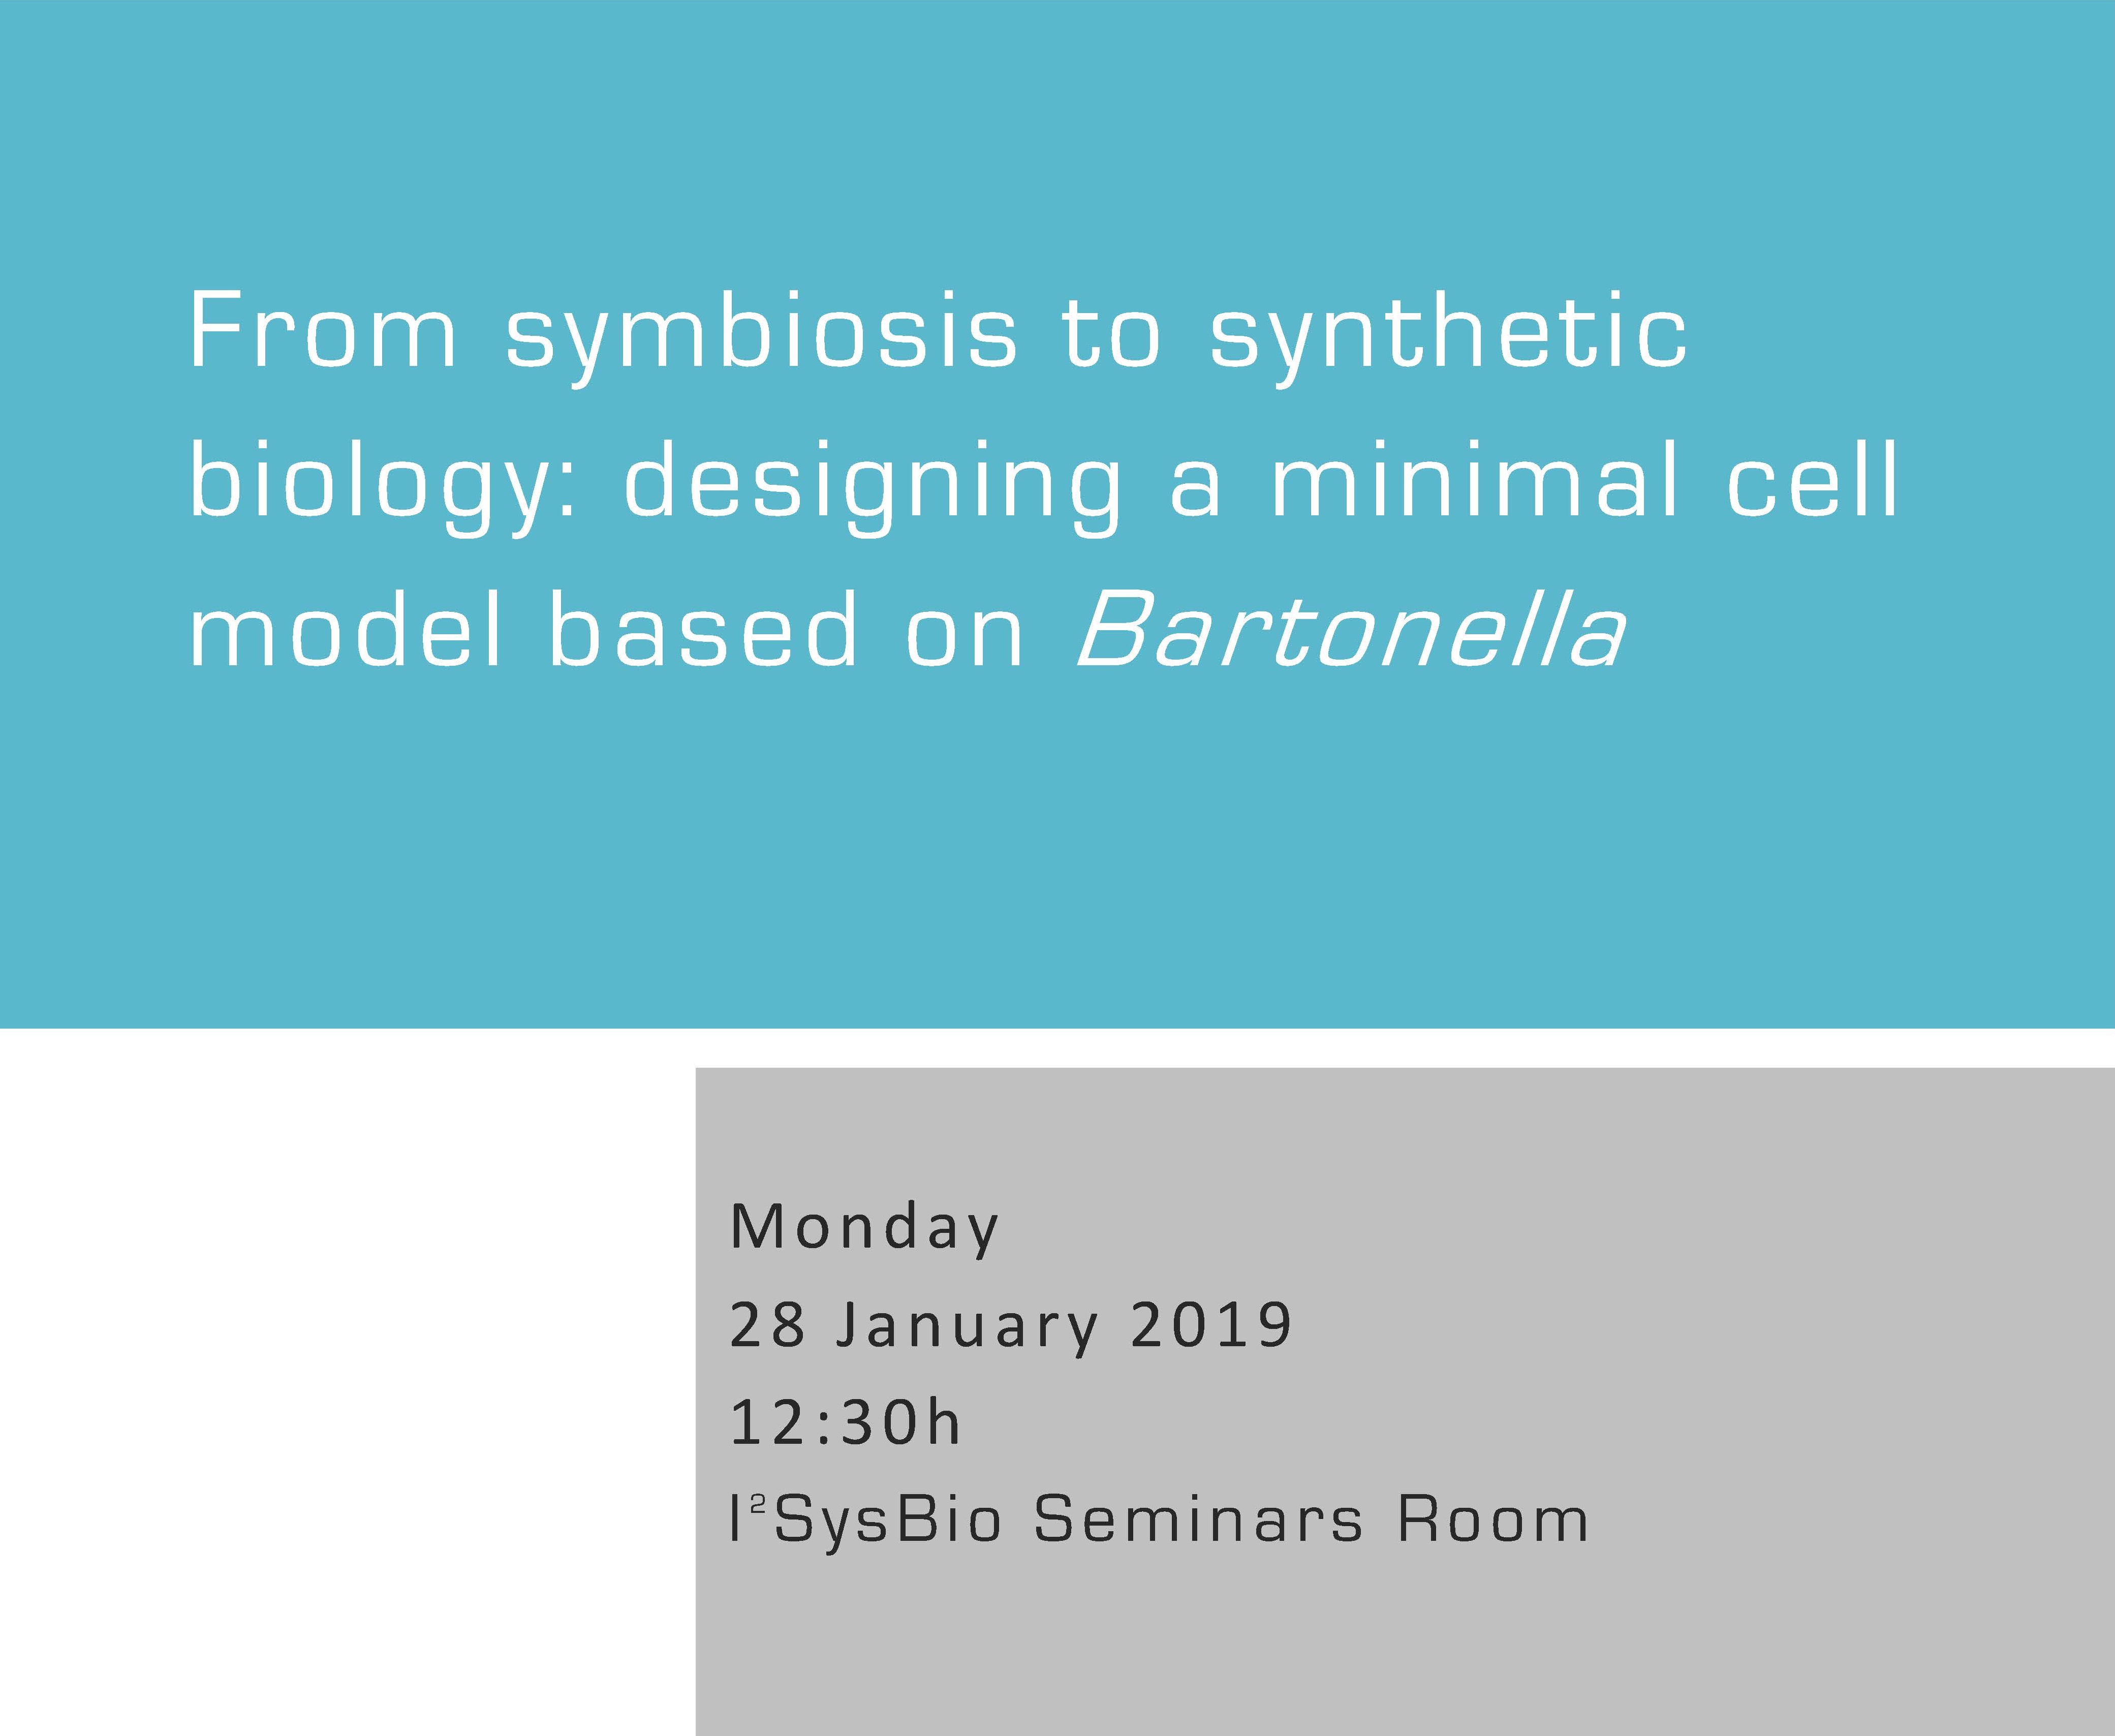 From symbiosis to synthetic biology: designing a minimal cell model based on Bartonella